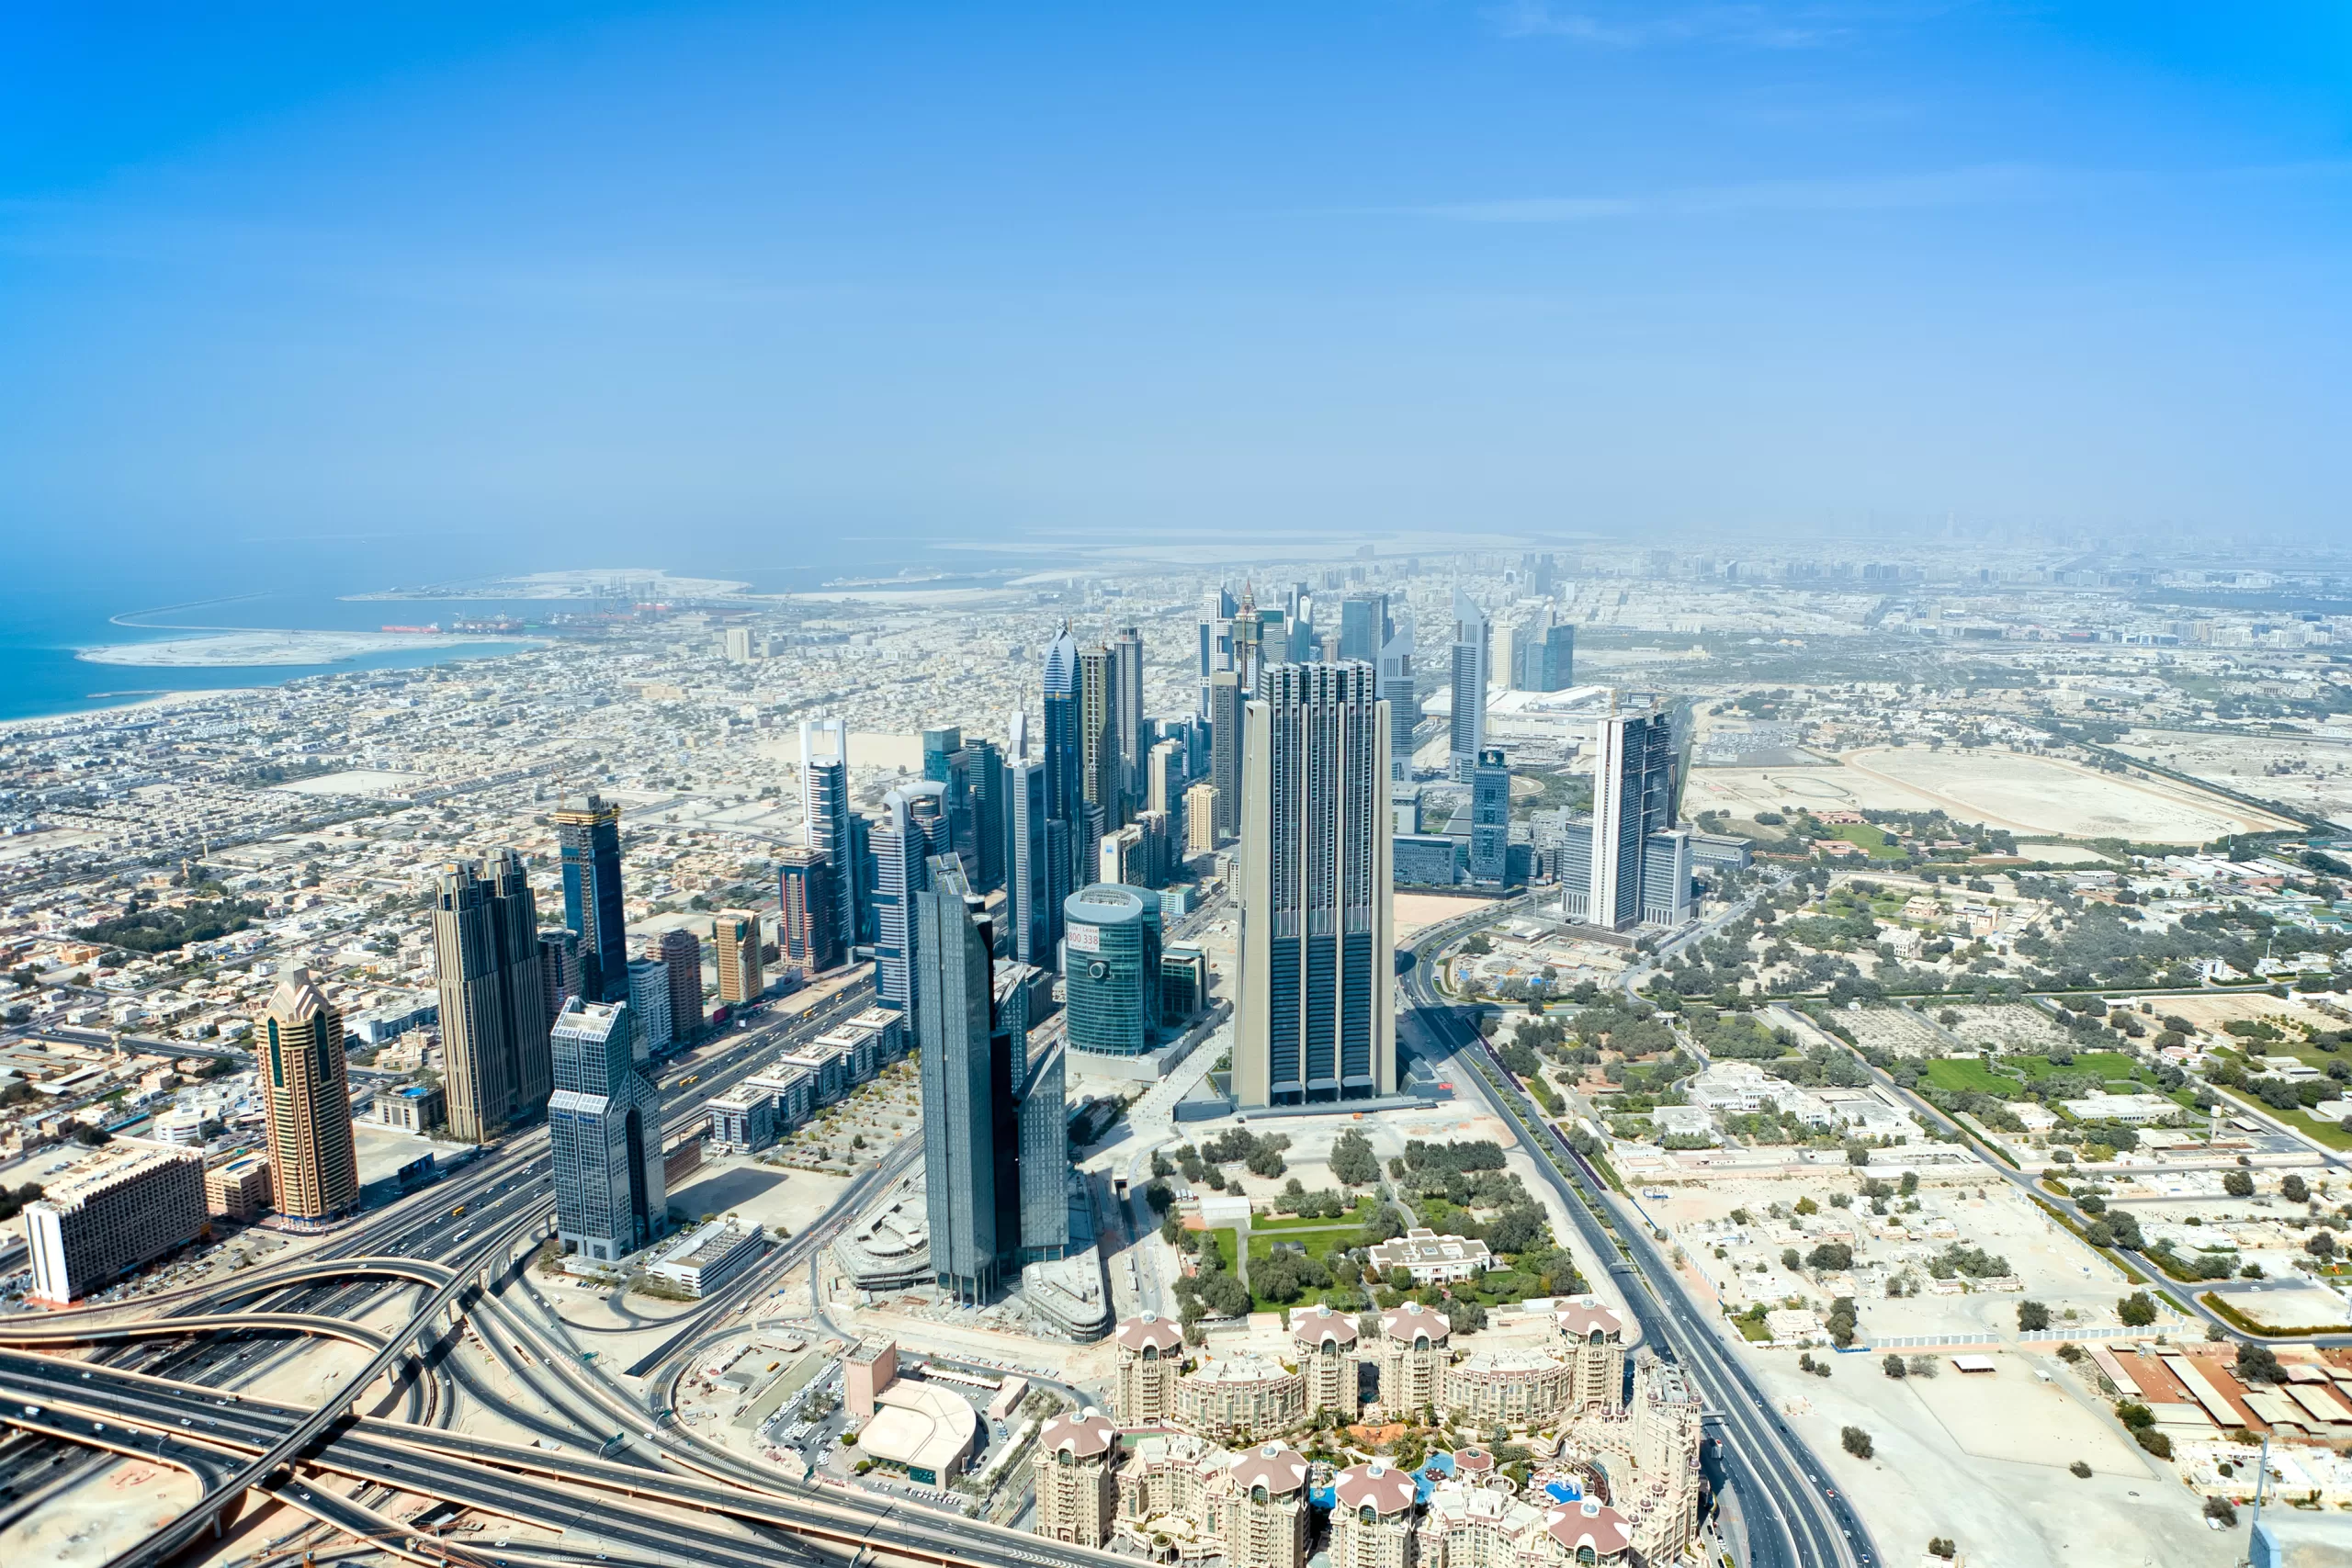 Which industry is growing fast in Dubai?